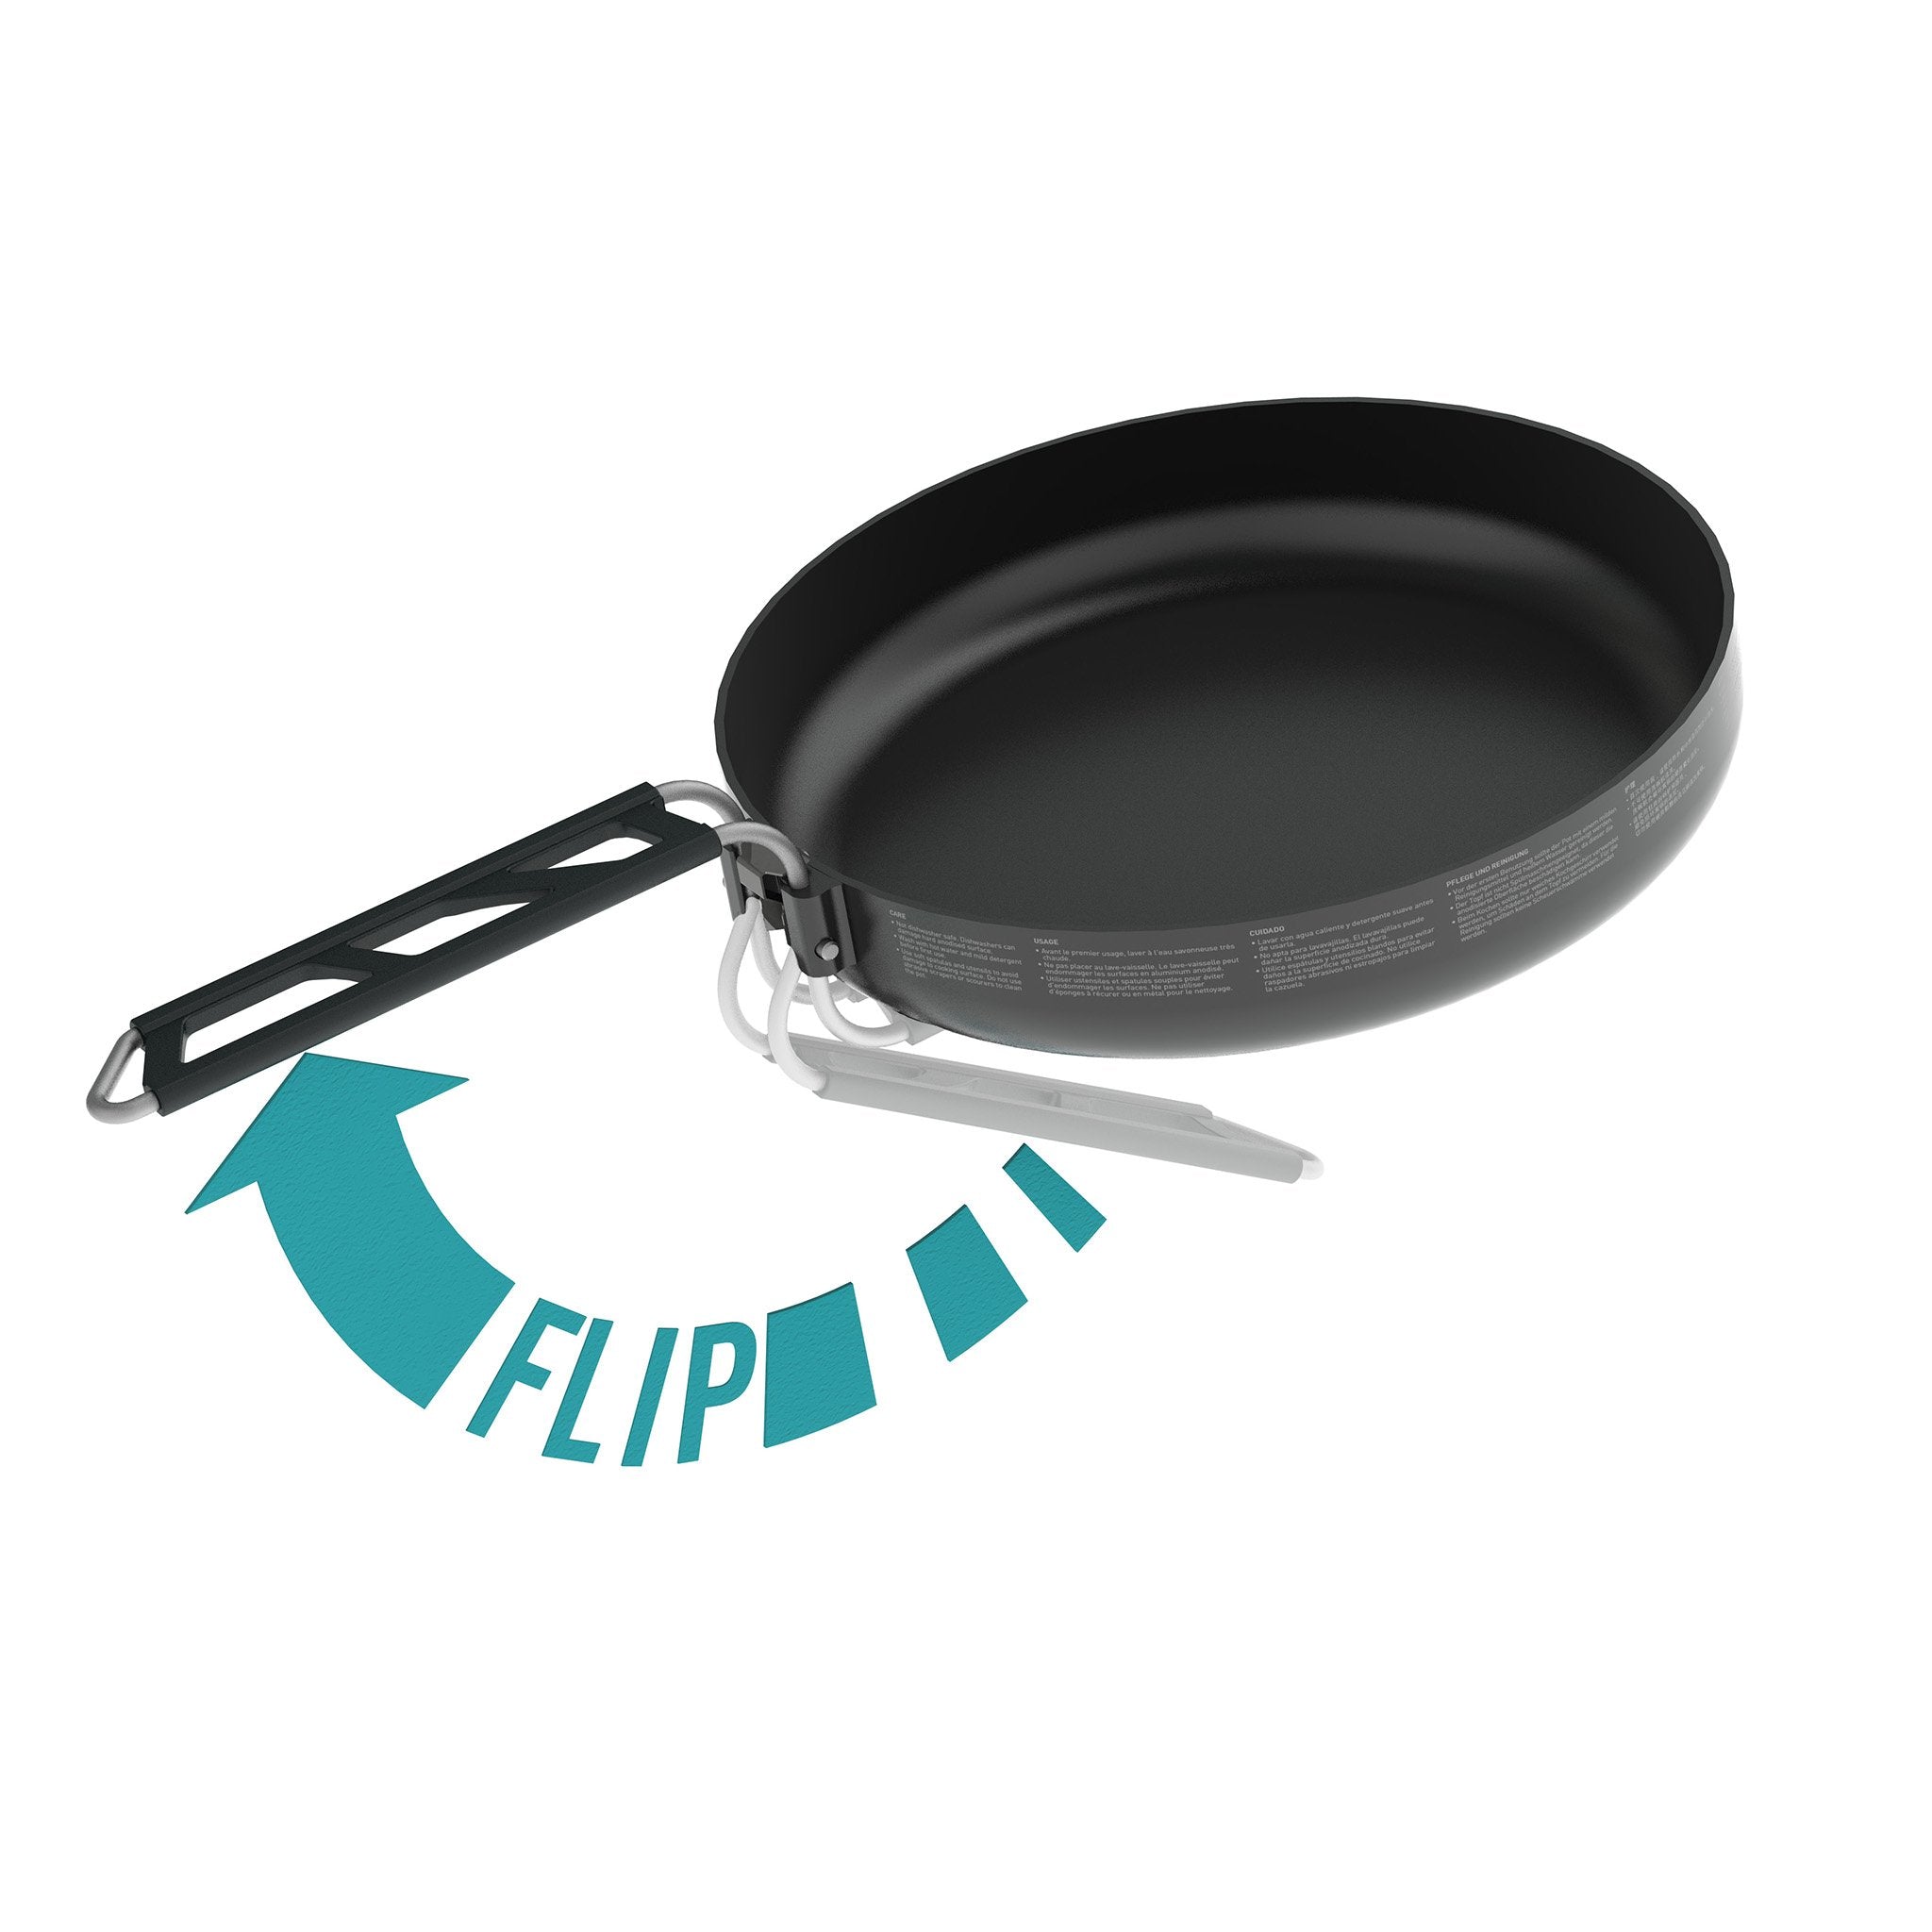 Sea to Summit Alpha Lightweight Camping Fry Pan 8-inch